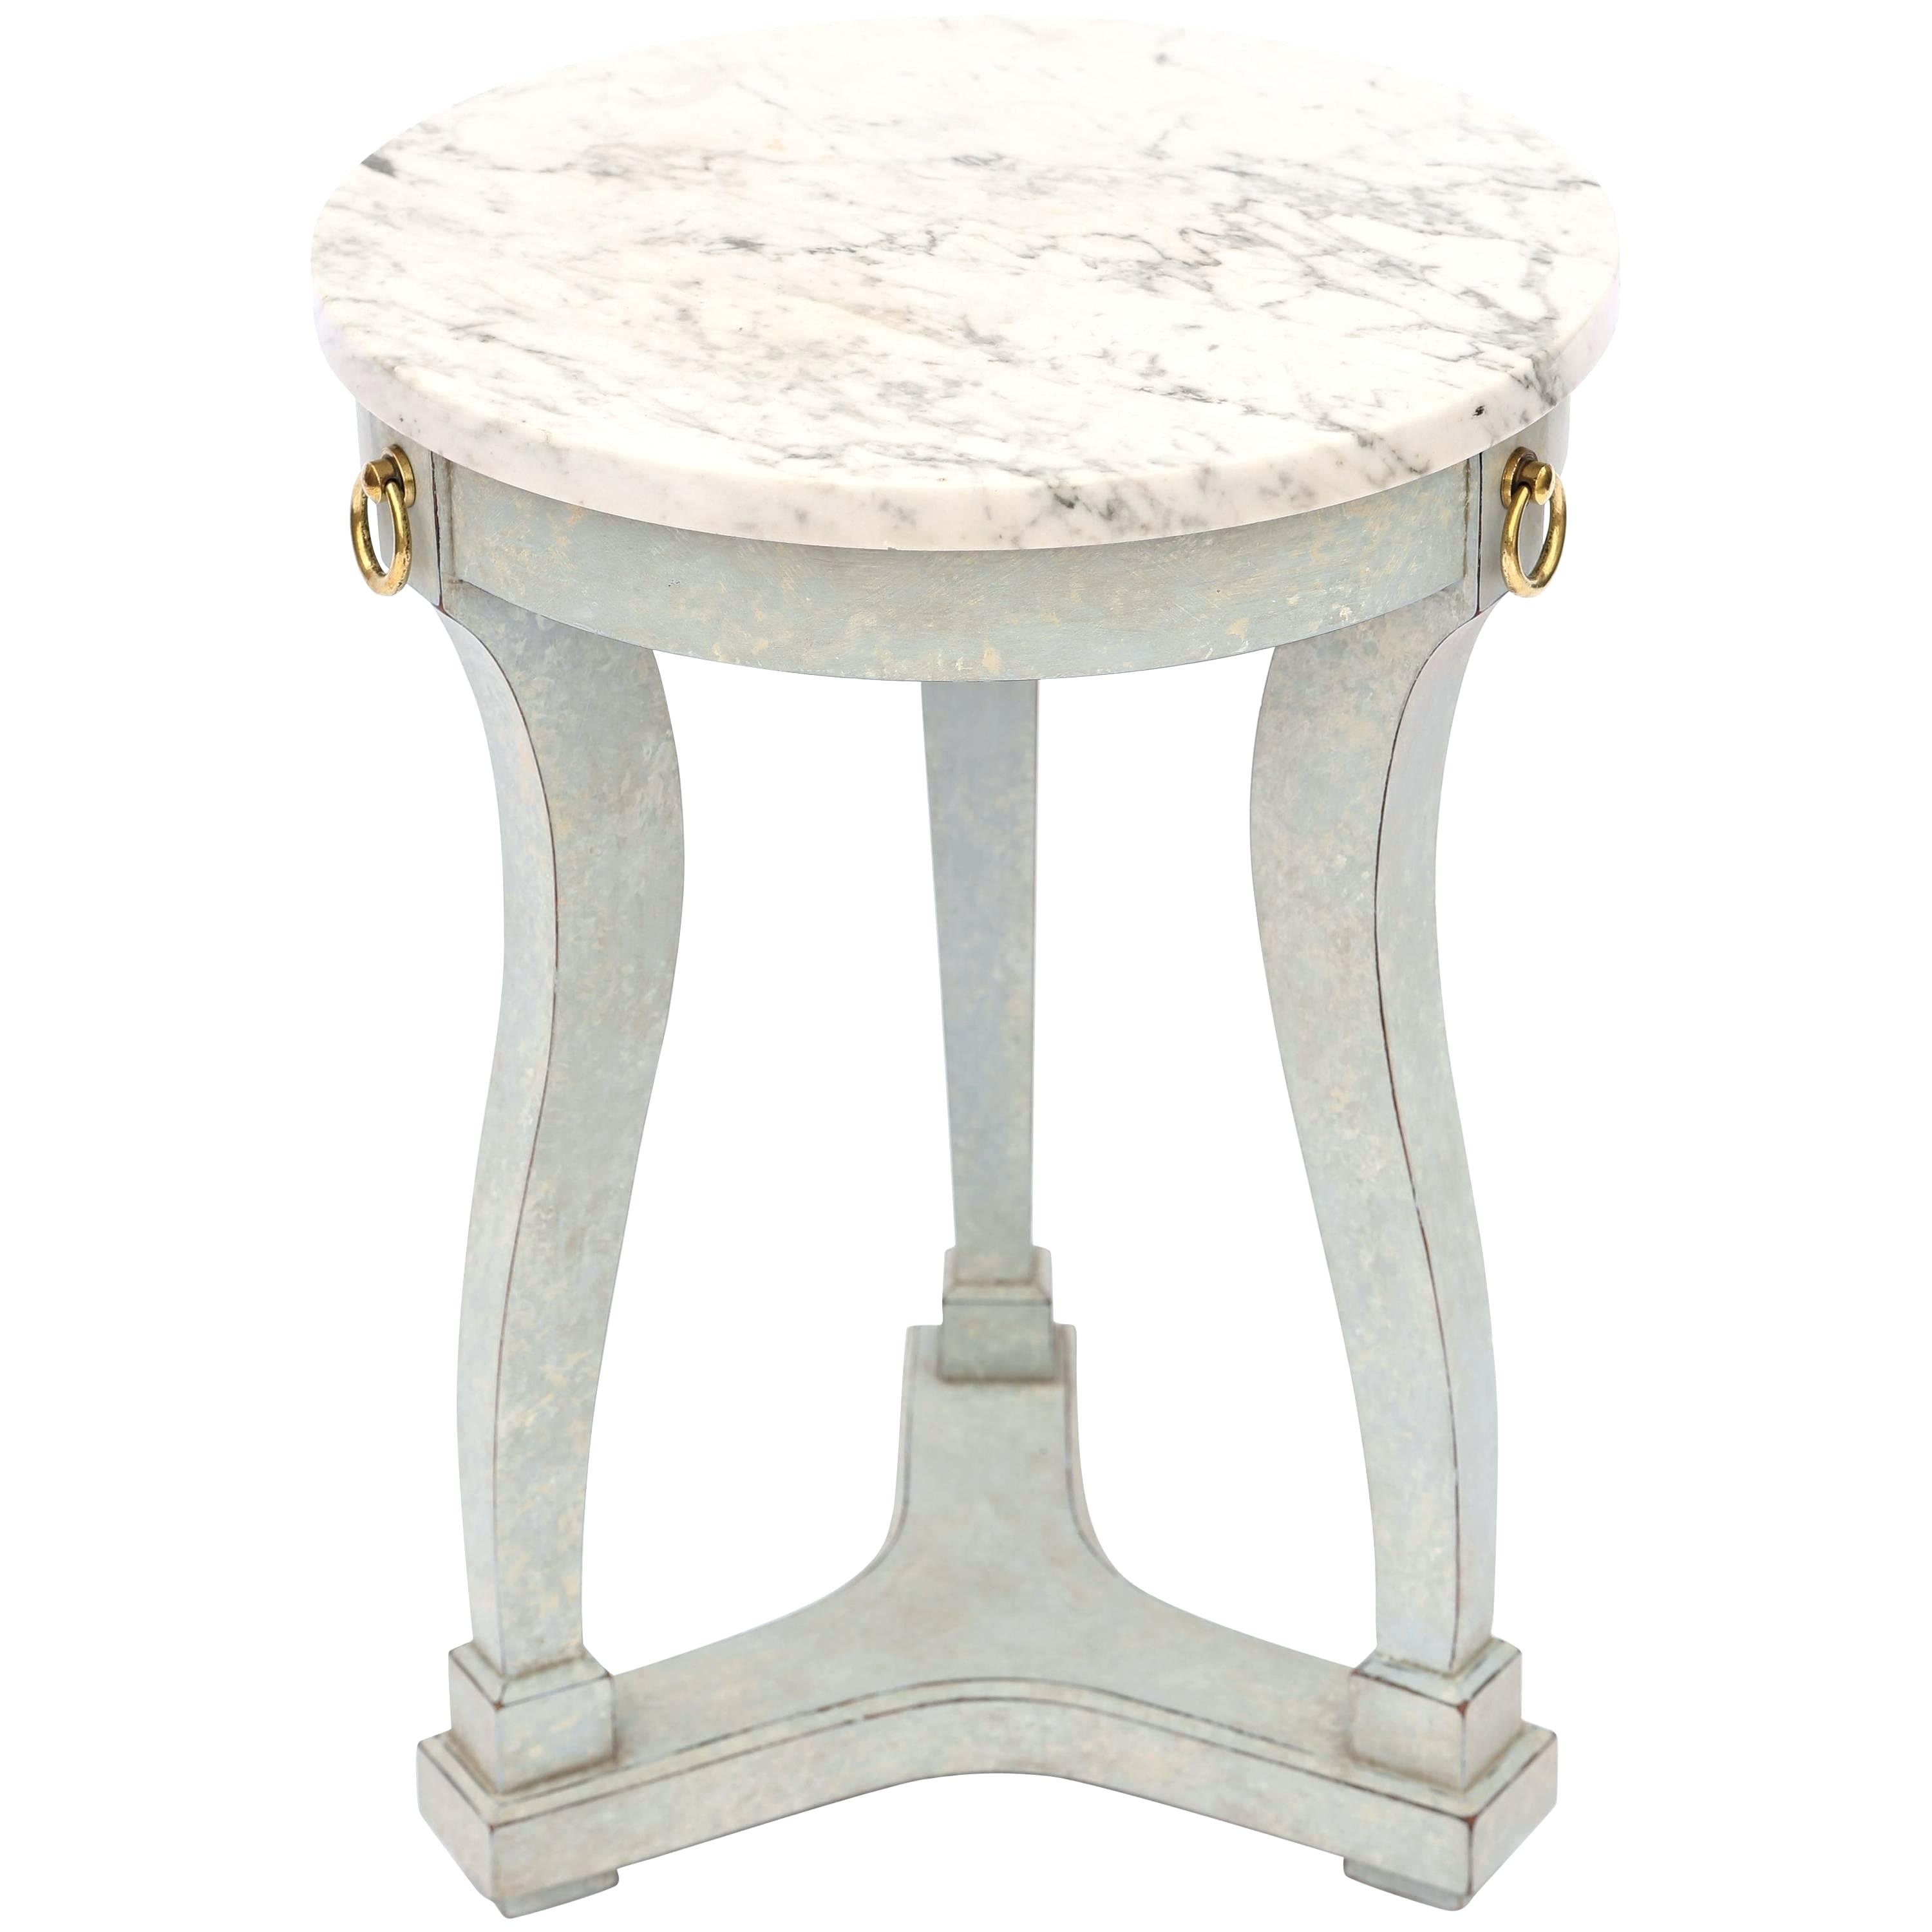 classical form painted accent table with marble top for small round light accents floor lamp dark cherry ouroboros mouse wine cupboard red silver end tables glass pedestal side